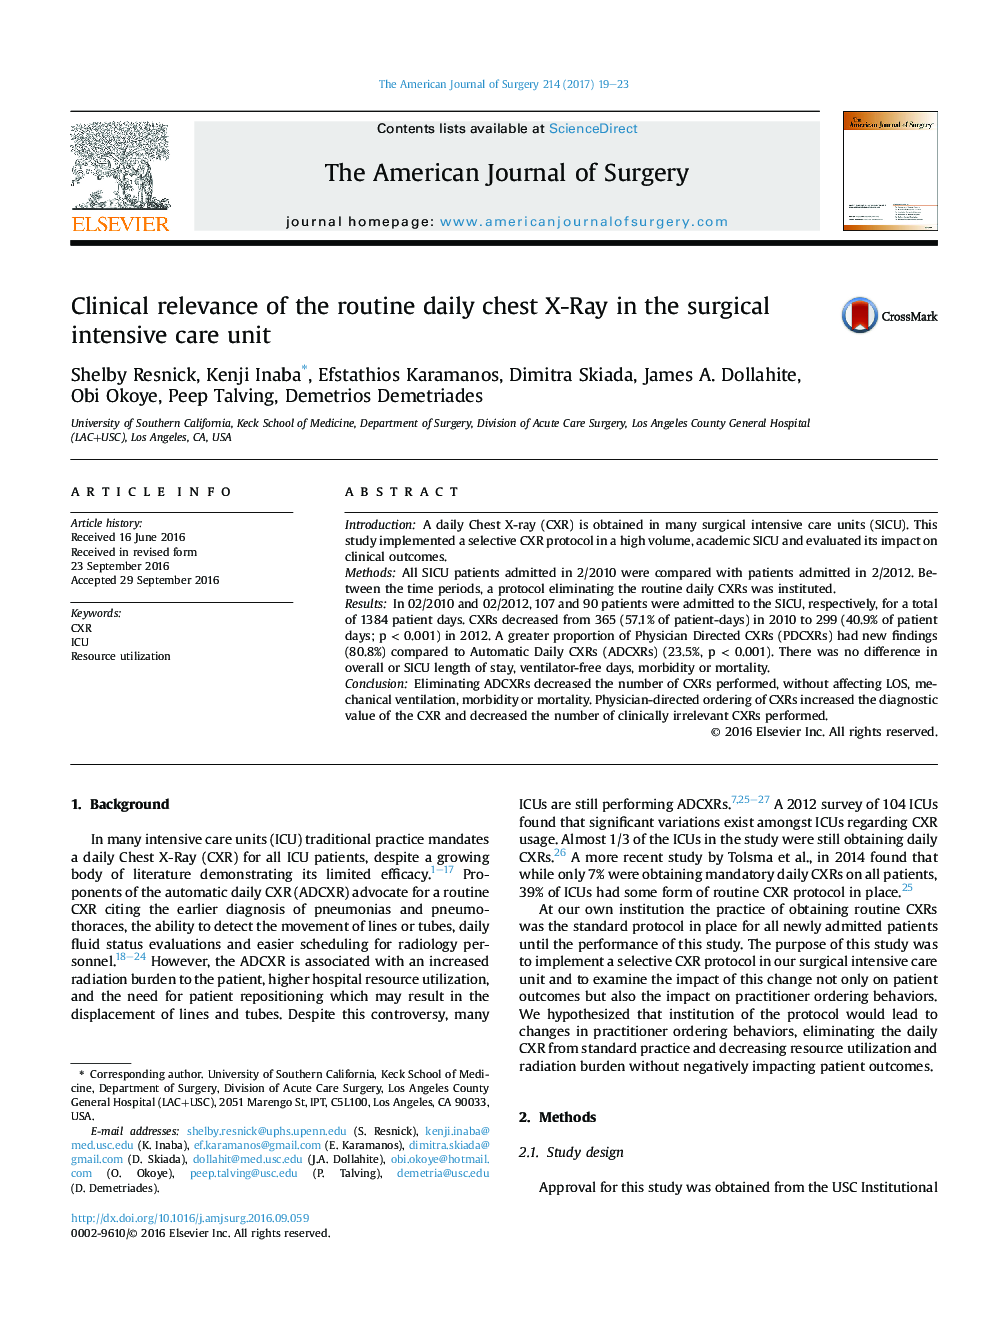 Clinical relevance of the routine daily chest X-Ray in the surgical intensive care unit